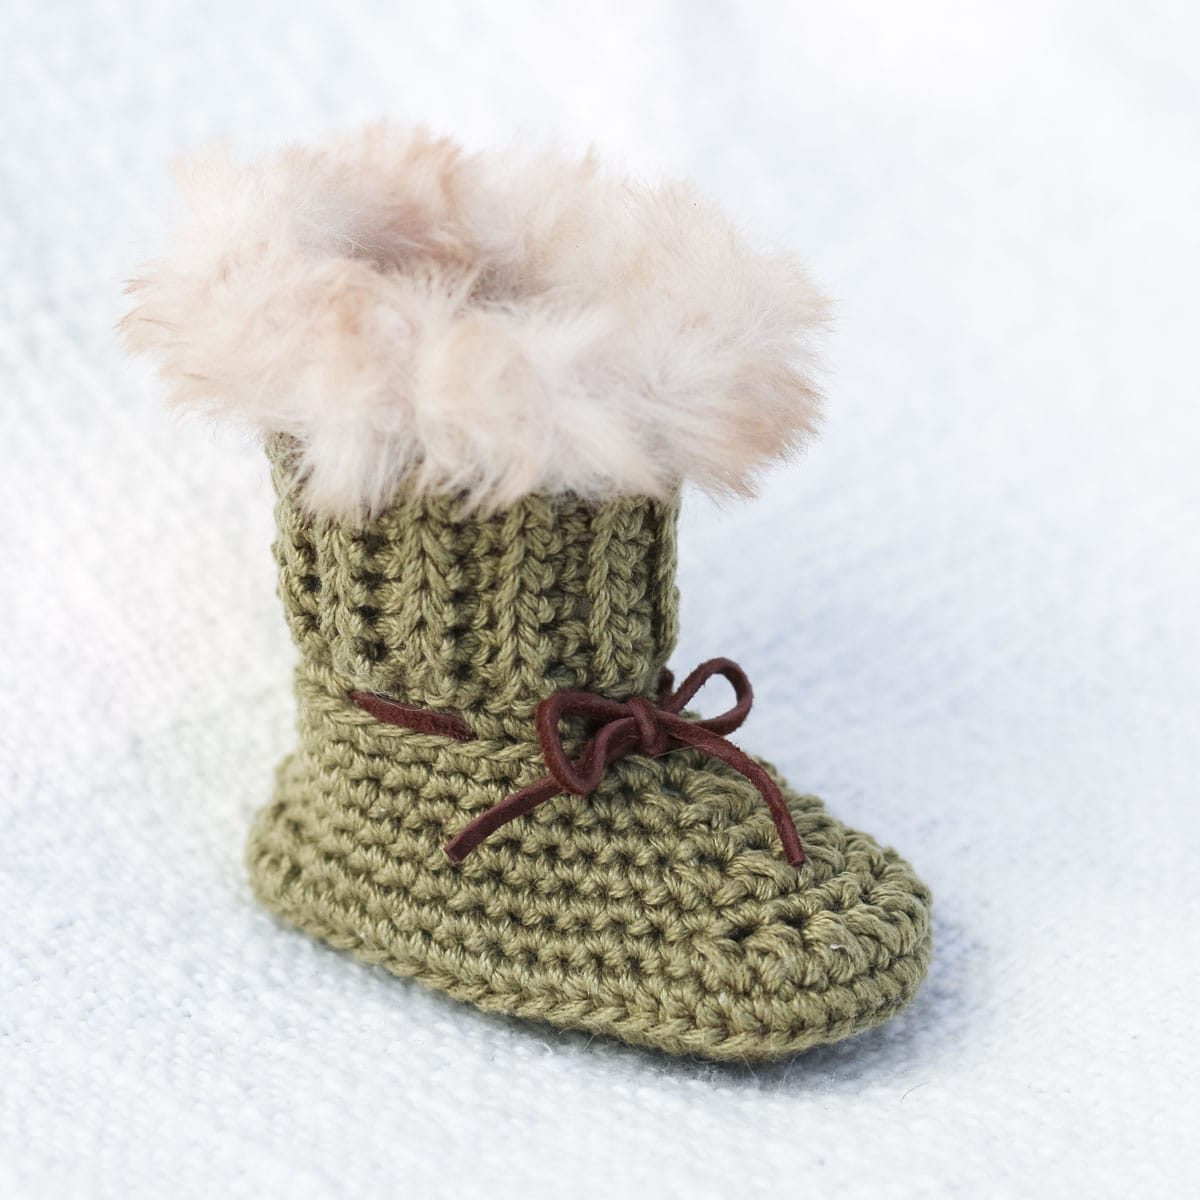 Green crochet baby bootie with fur trim and leather.